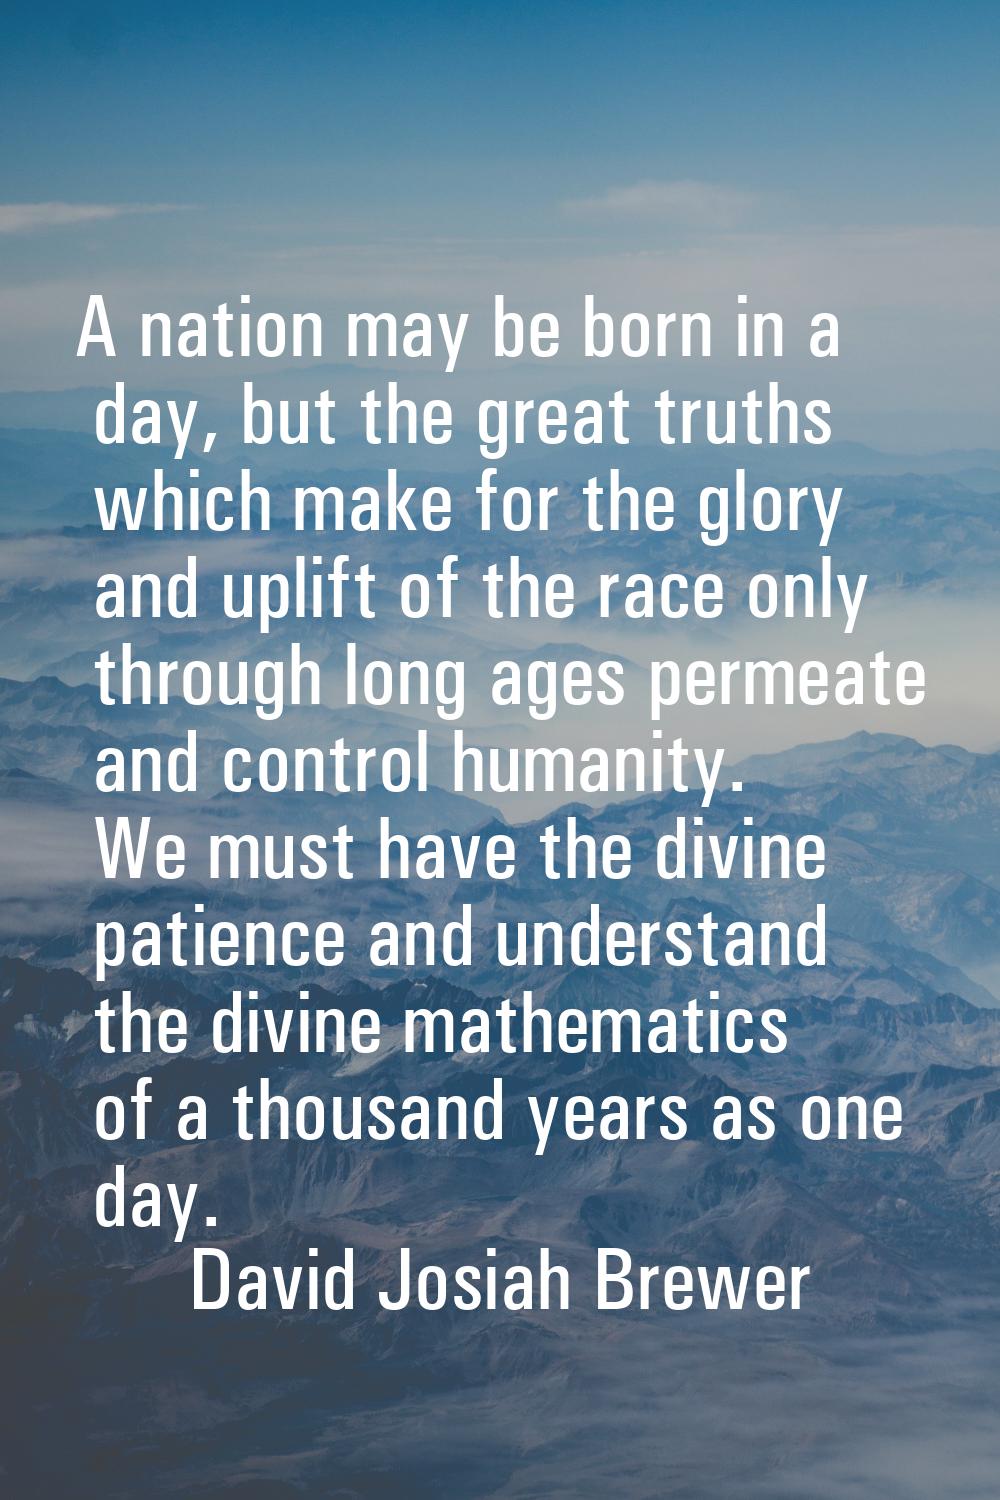 A nation may be born in a day, but the great truths which make for the glory and uplift of the race